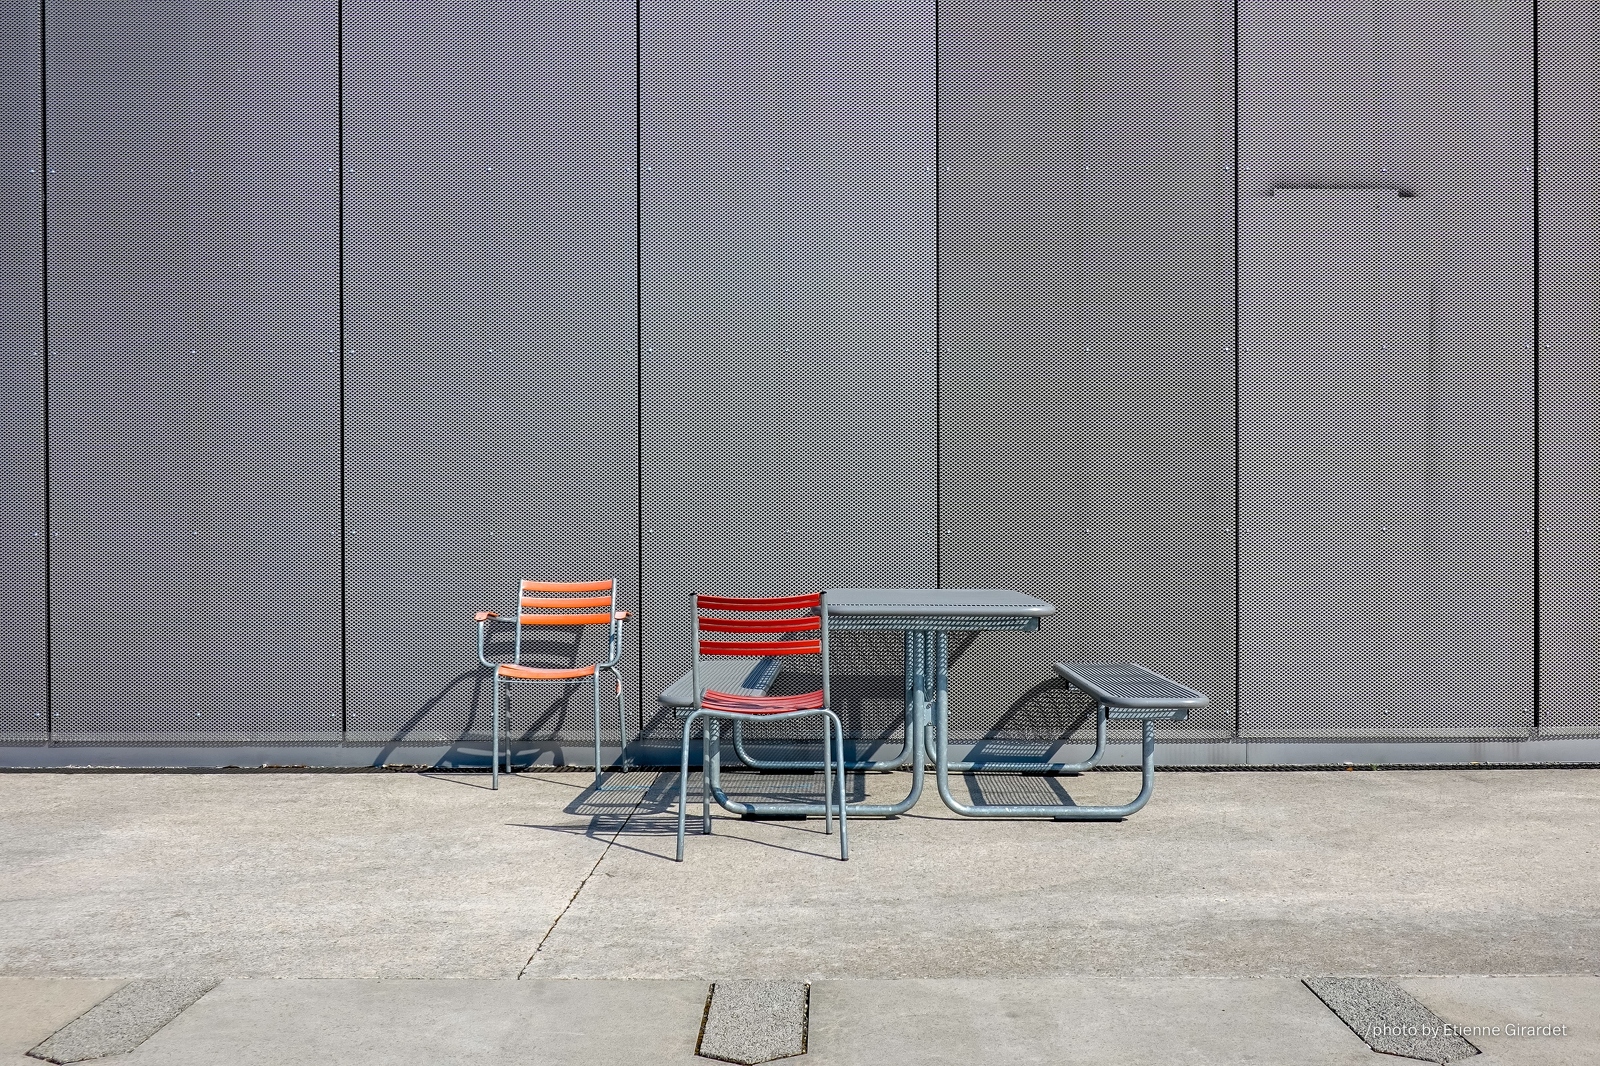 201808_02_RXX1263-chairs-table-rooftop-sunny-by-E-Girardet.jpg